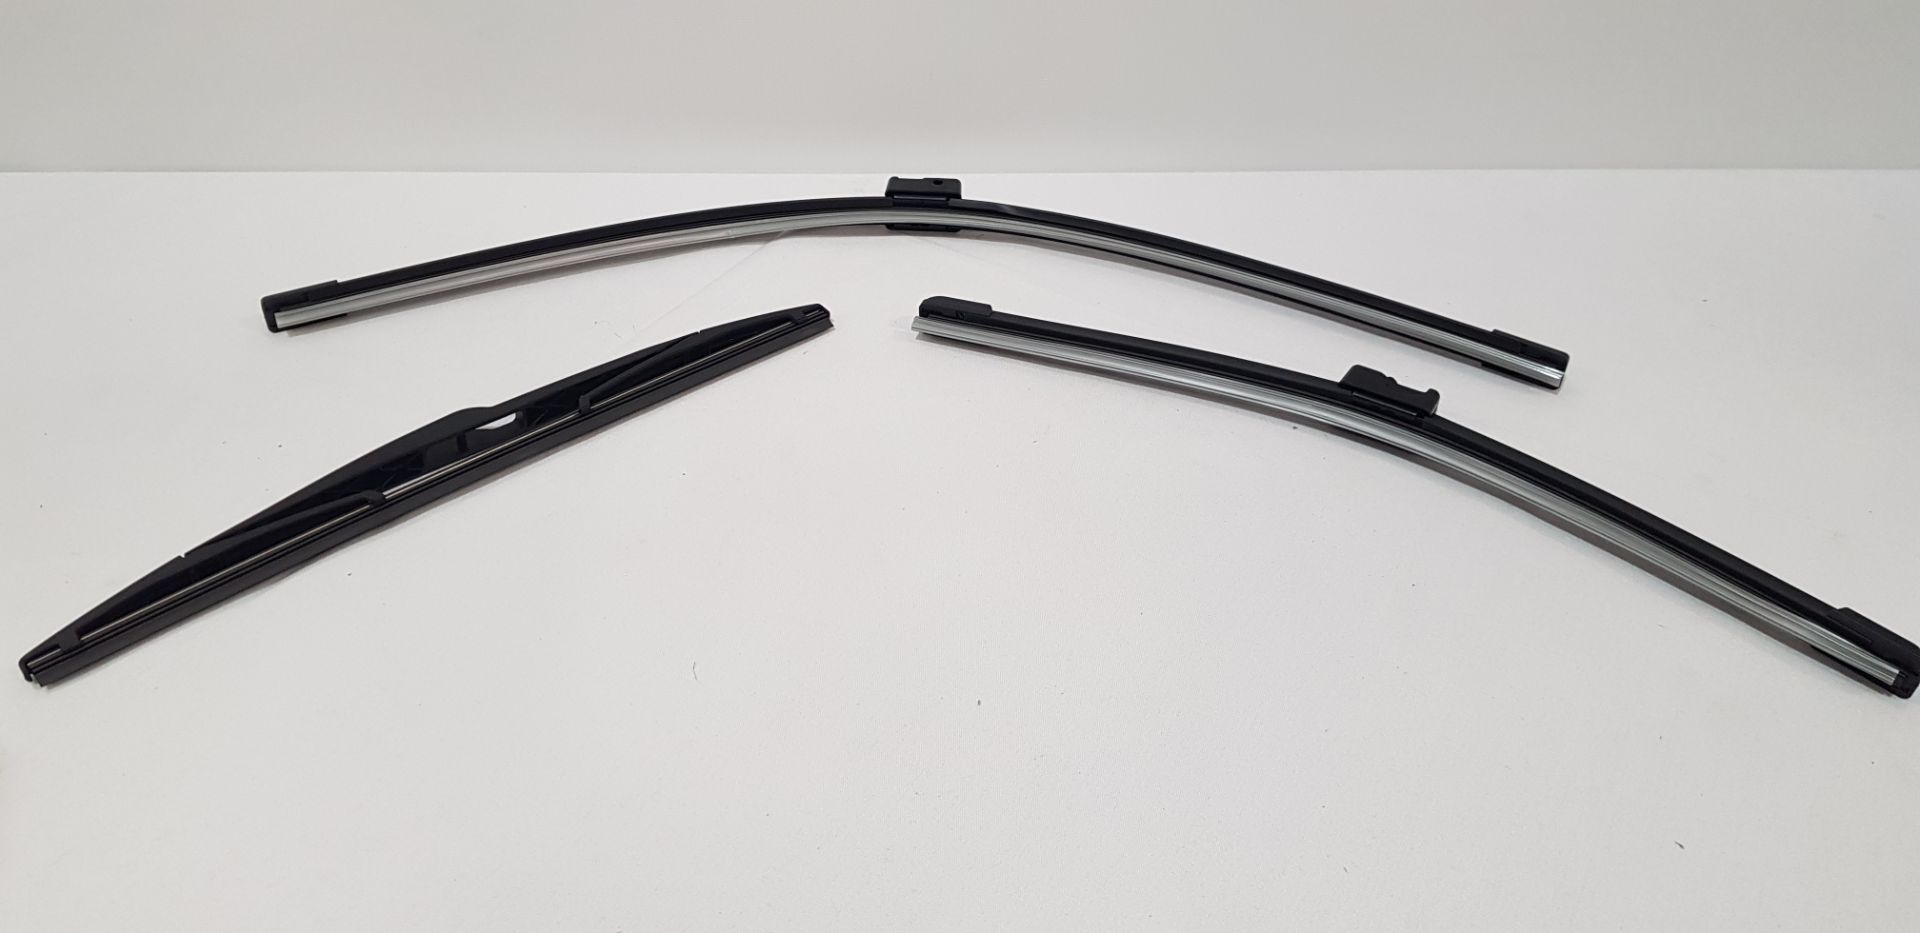 195 X BRAND NEW 3 PIECE FRONT AND REAR WIPER BLADE SET FOR MK 2 FORD FOCUS 1 X DRIVERS SIDE WIPER